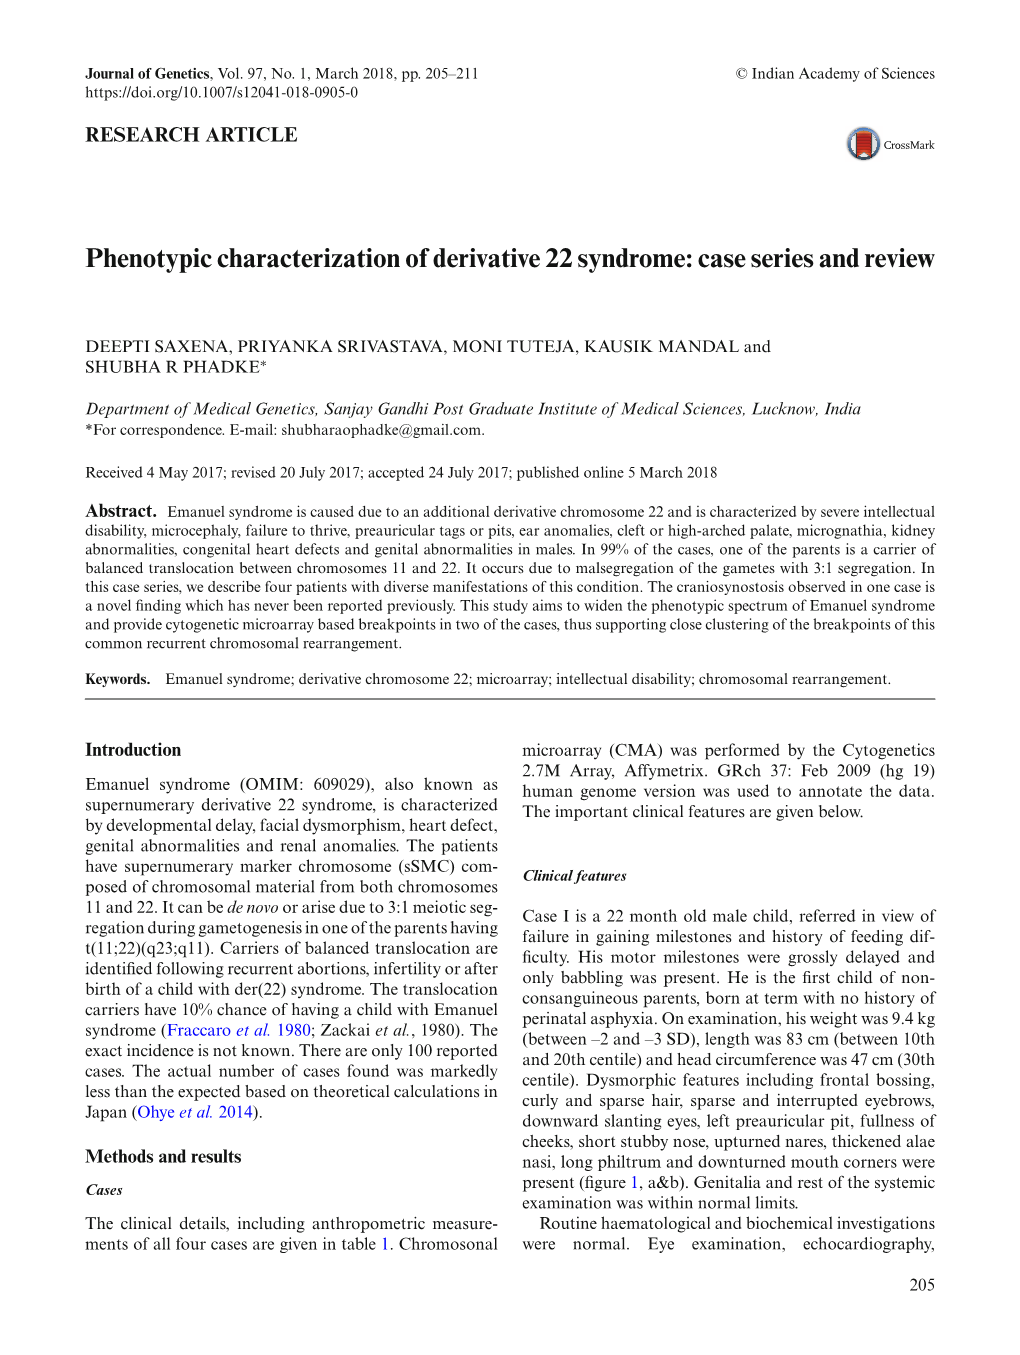 Phenotypic Characterization of Derivative 22 Syndrome: Case Series and Review